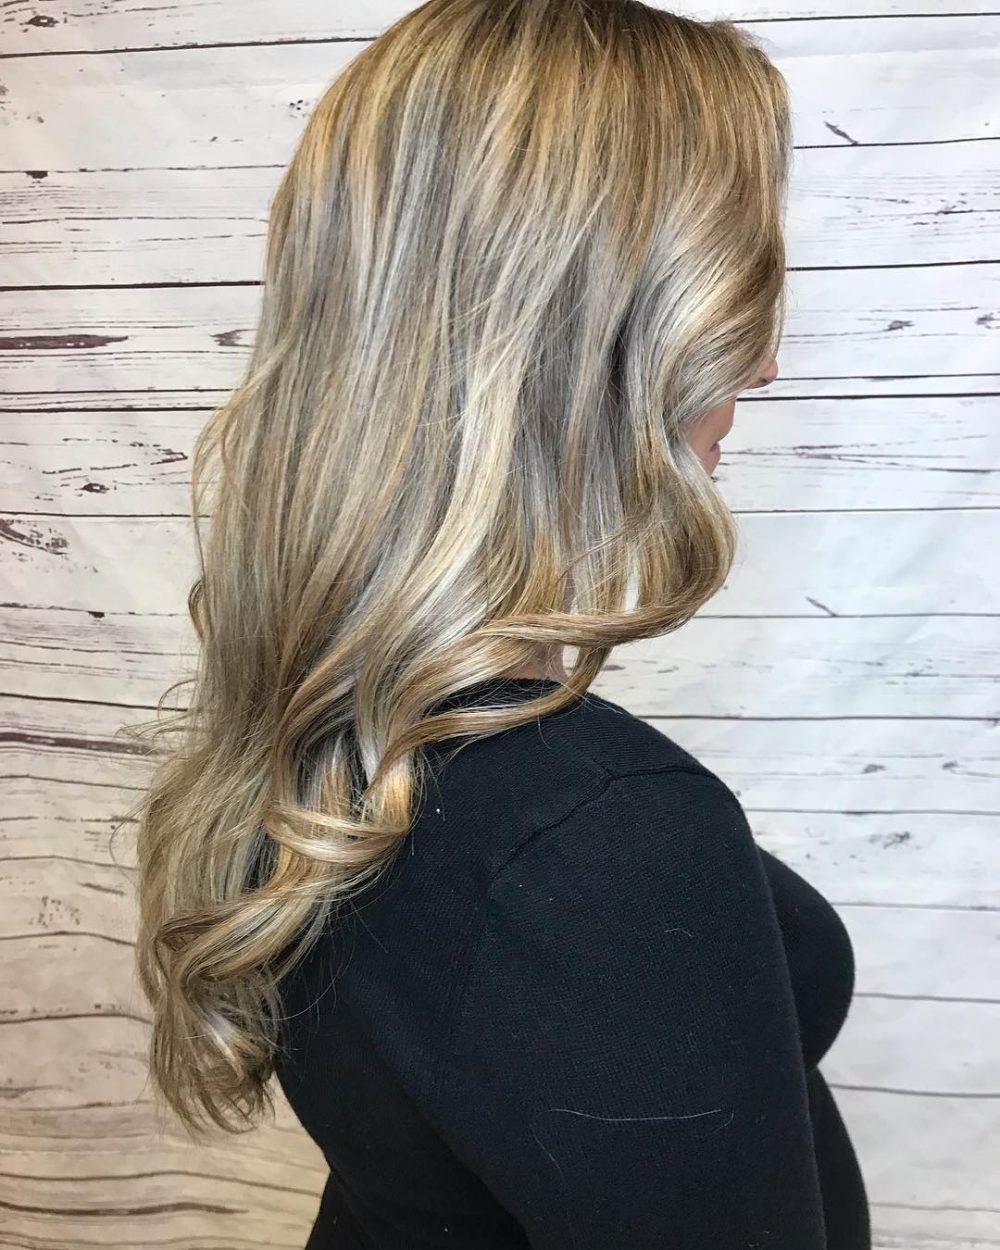 Light Ash Blonde Hair: What It Looks Like + 20 Trendy Examples